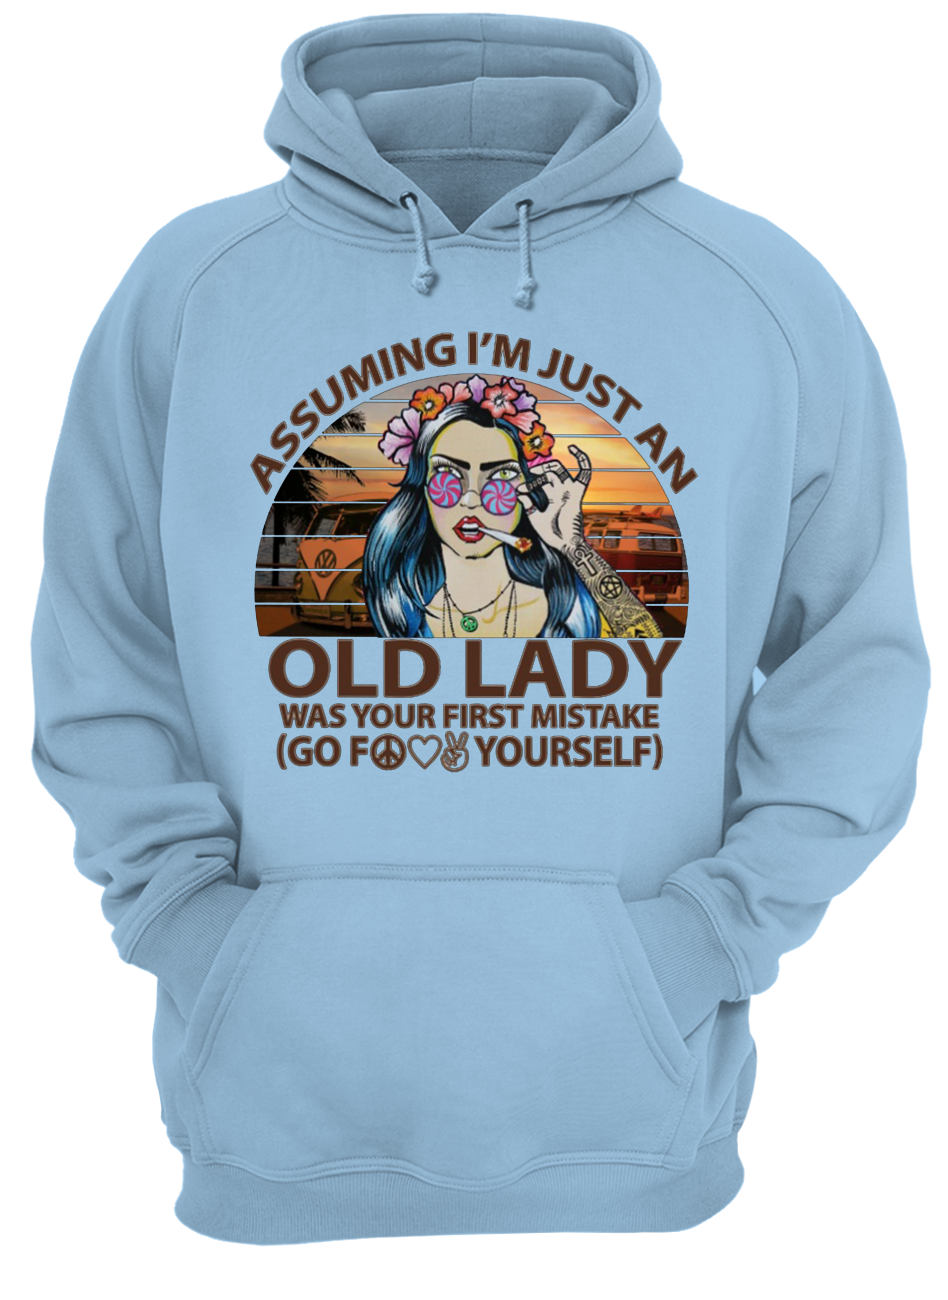 Hippie girl assuming I'm just an old lady was your first mistake vintage hoodie